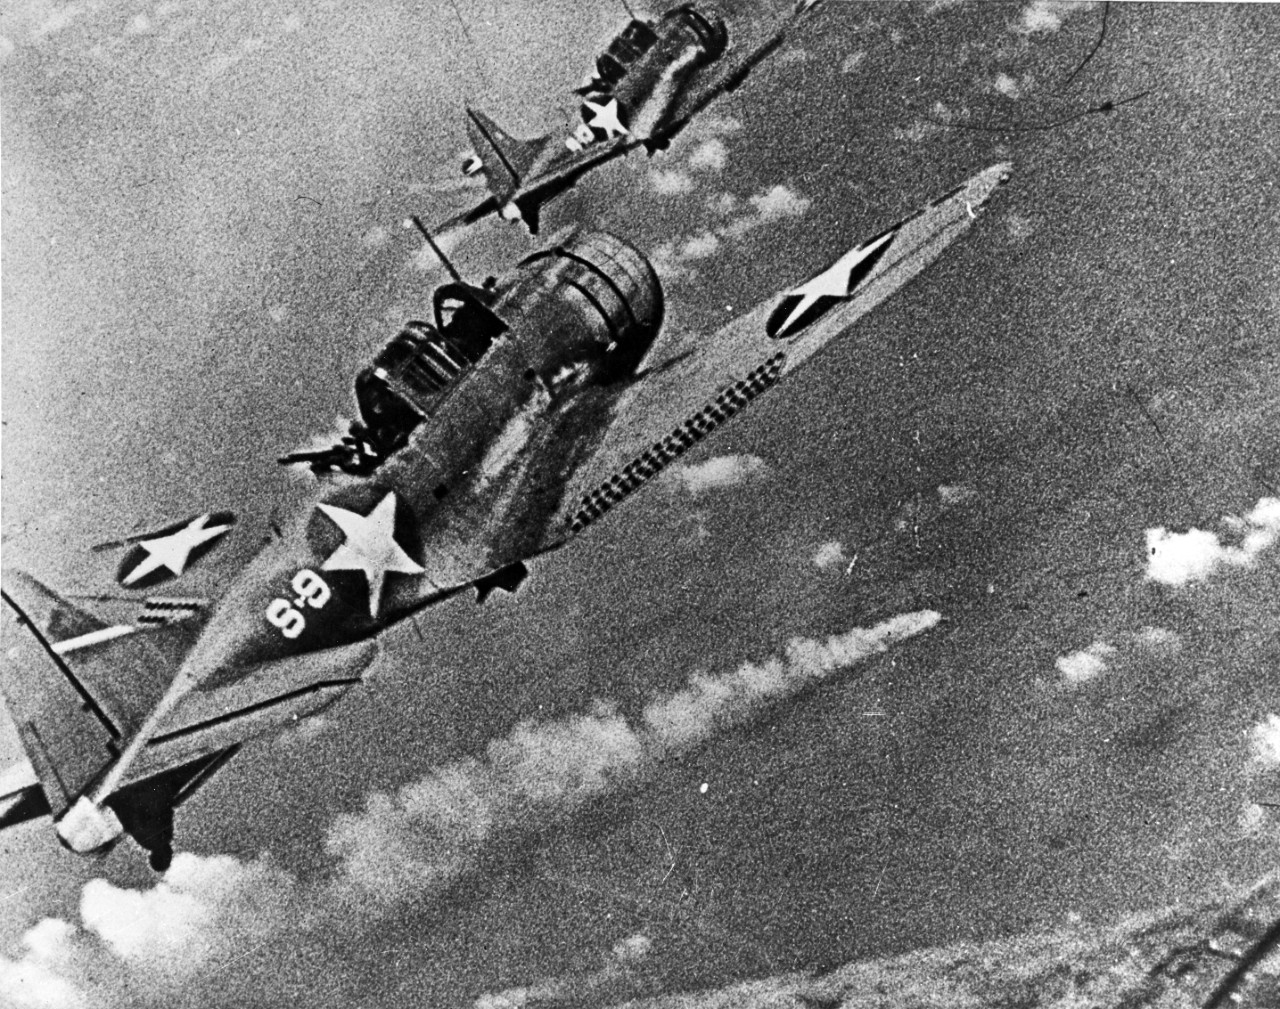 Photo #: 80-G-17054  Battle of Midway, June 1942